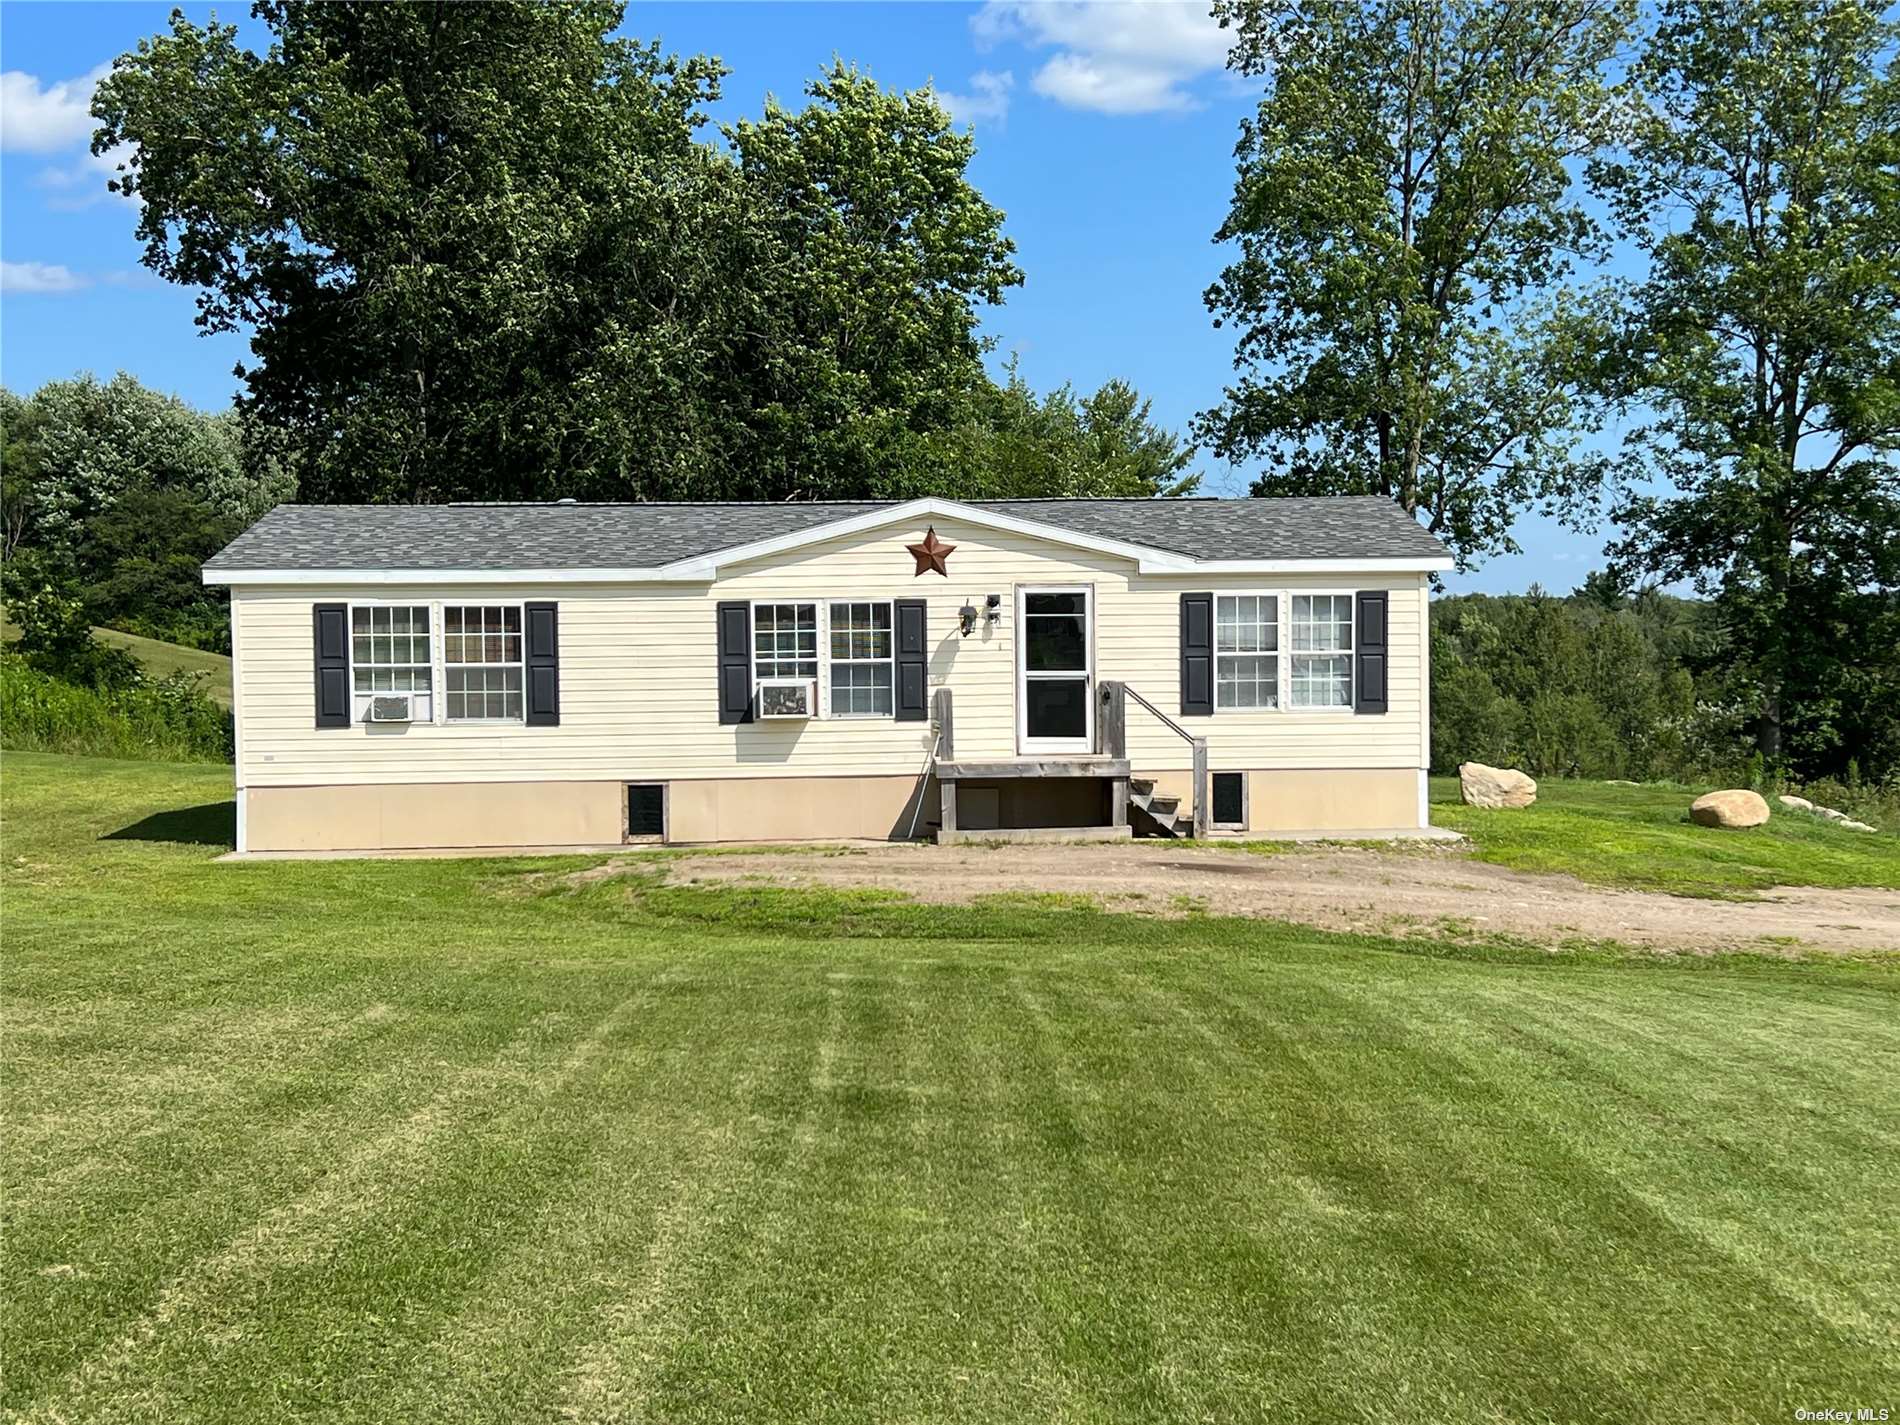 Single Family in Out Of Area Town - County Hwy 114  Out Of Area, NY 13452